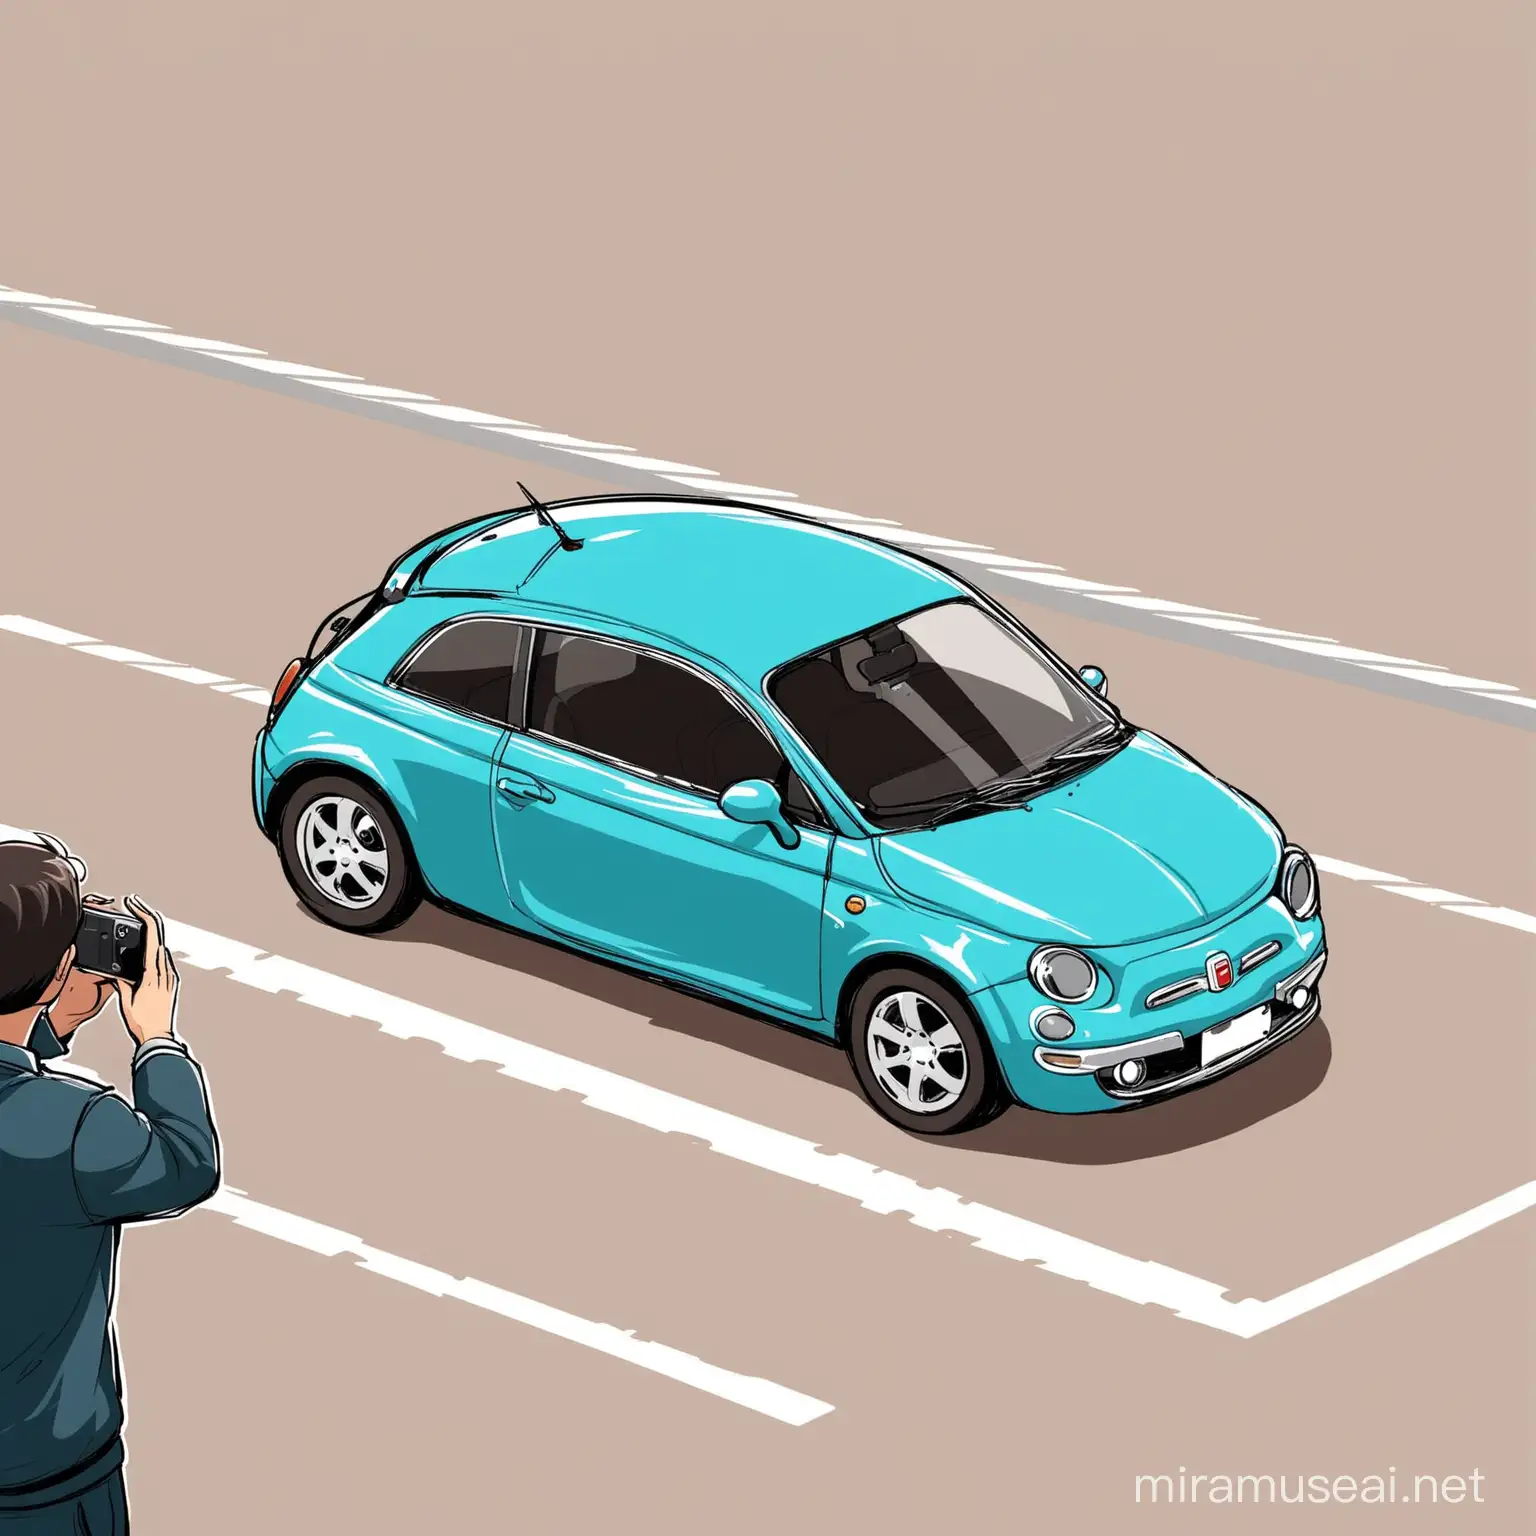 Man Taking Picture of Car Parked Illegally in Disabled Parking Spot Cartoon Style